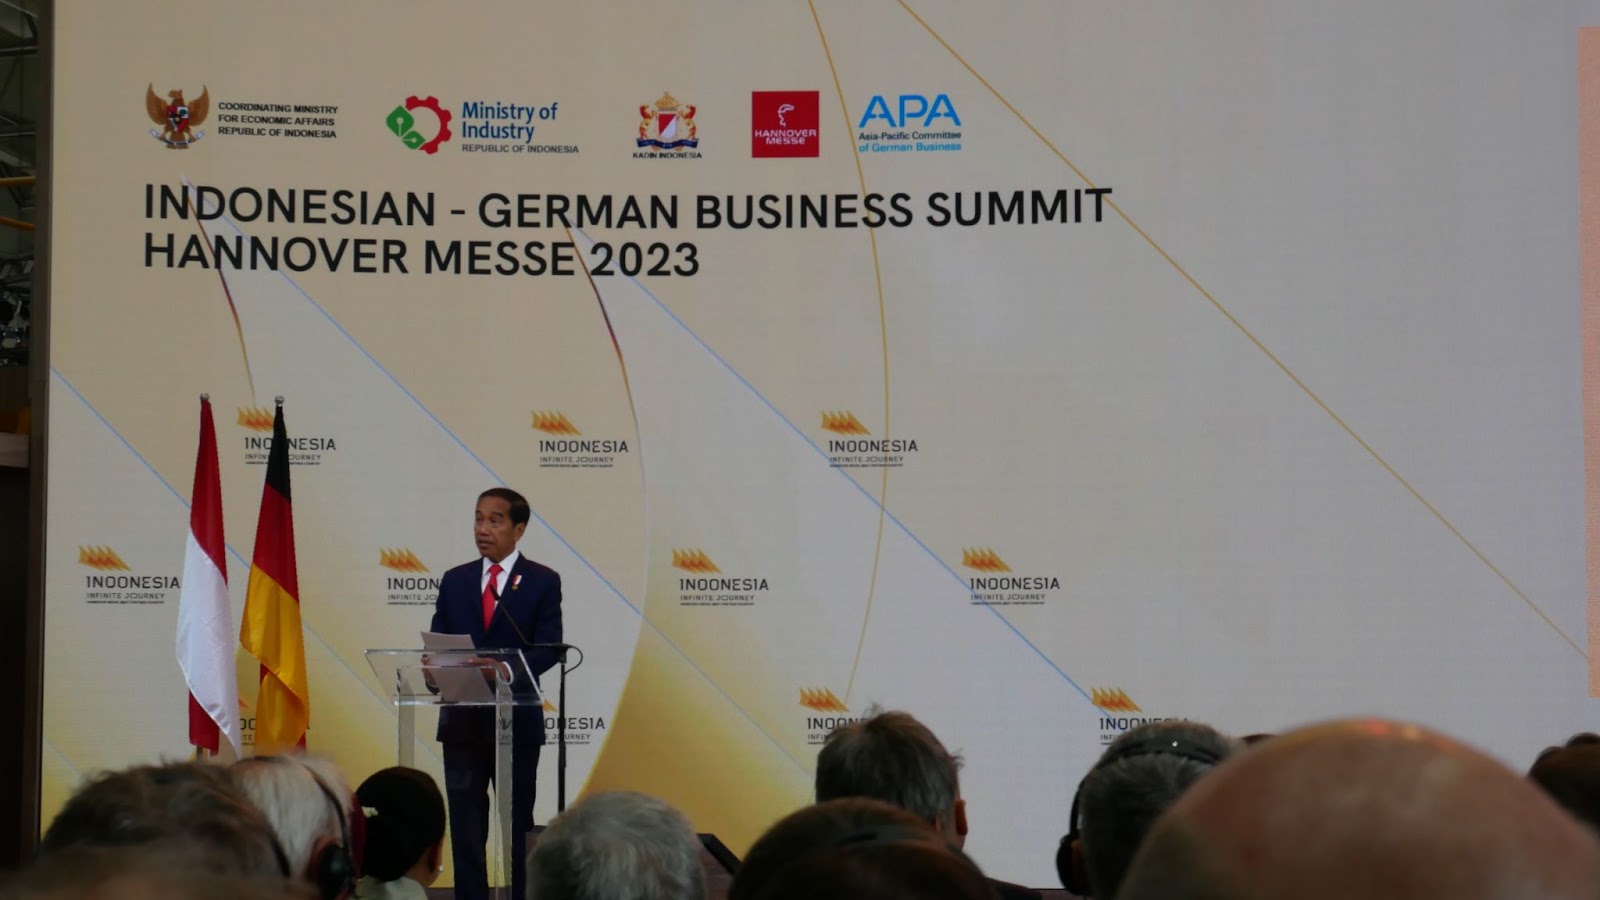 Hannover Messe 2023: Strengthening between Countries and Regional Collaboration through the Indonesia-Germany Business Summit